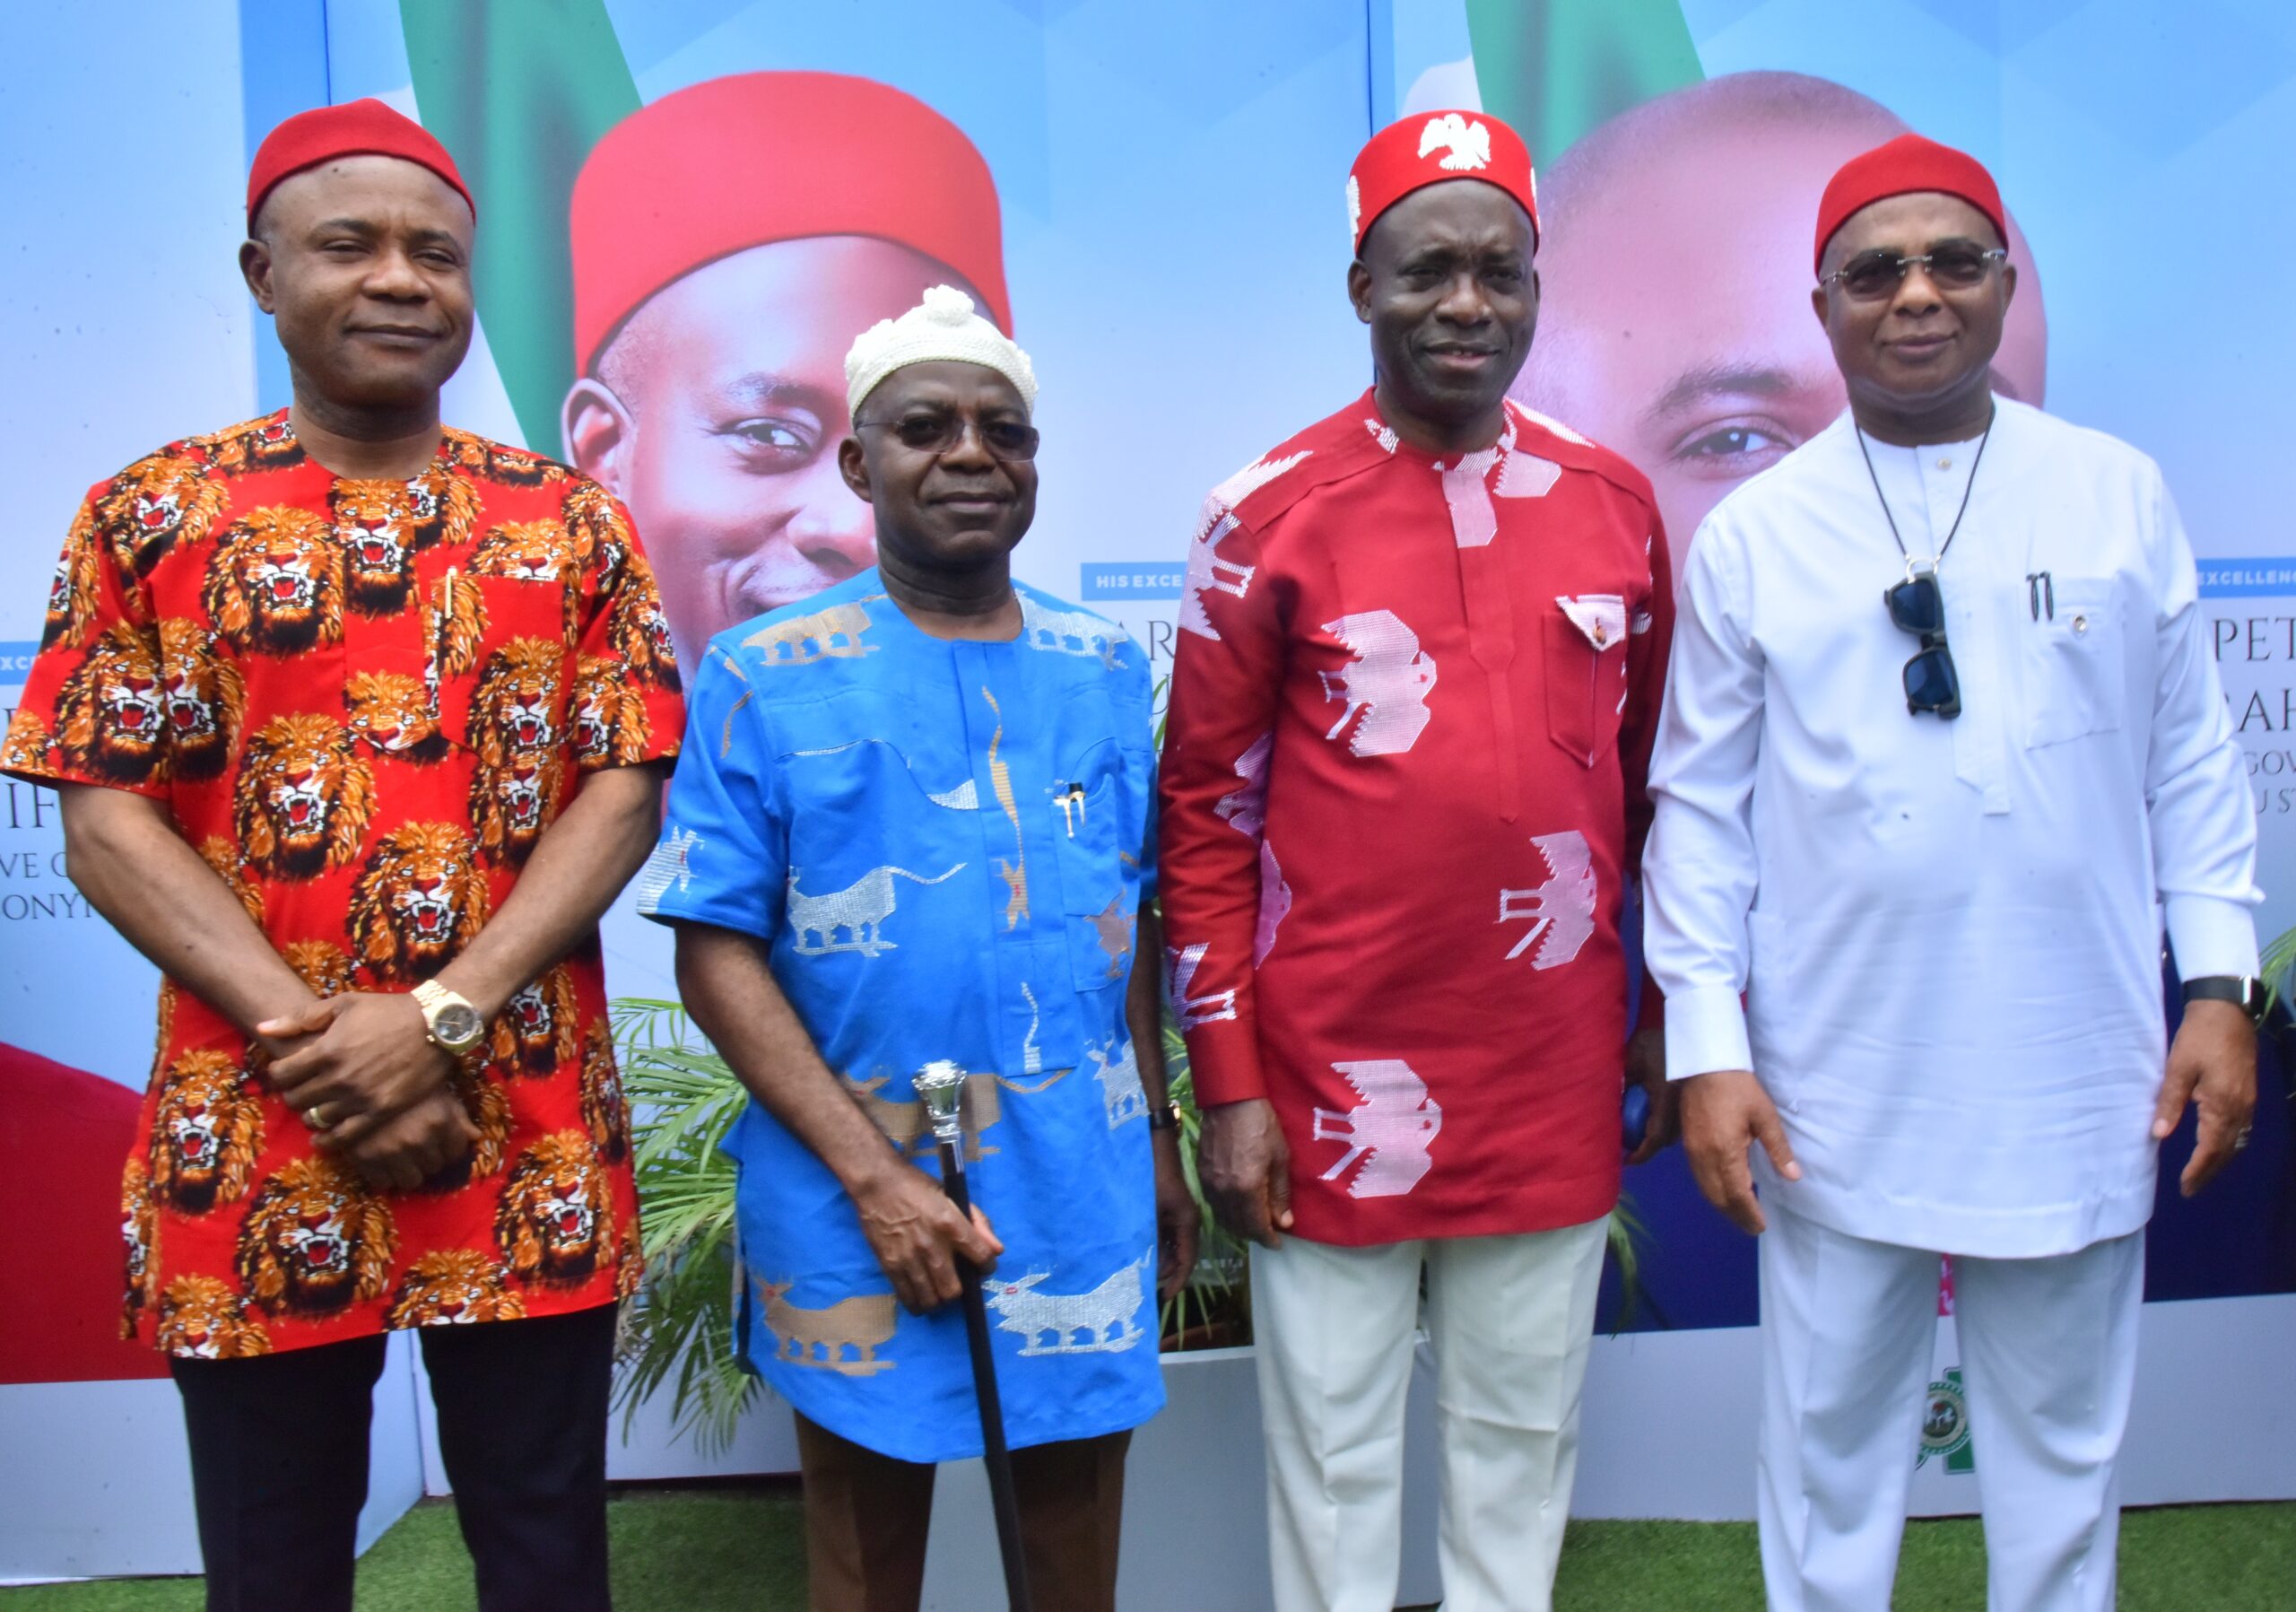 South East Summit Heralds A Glorious New Dawn, Says Uzodimma